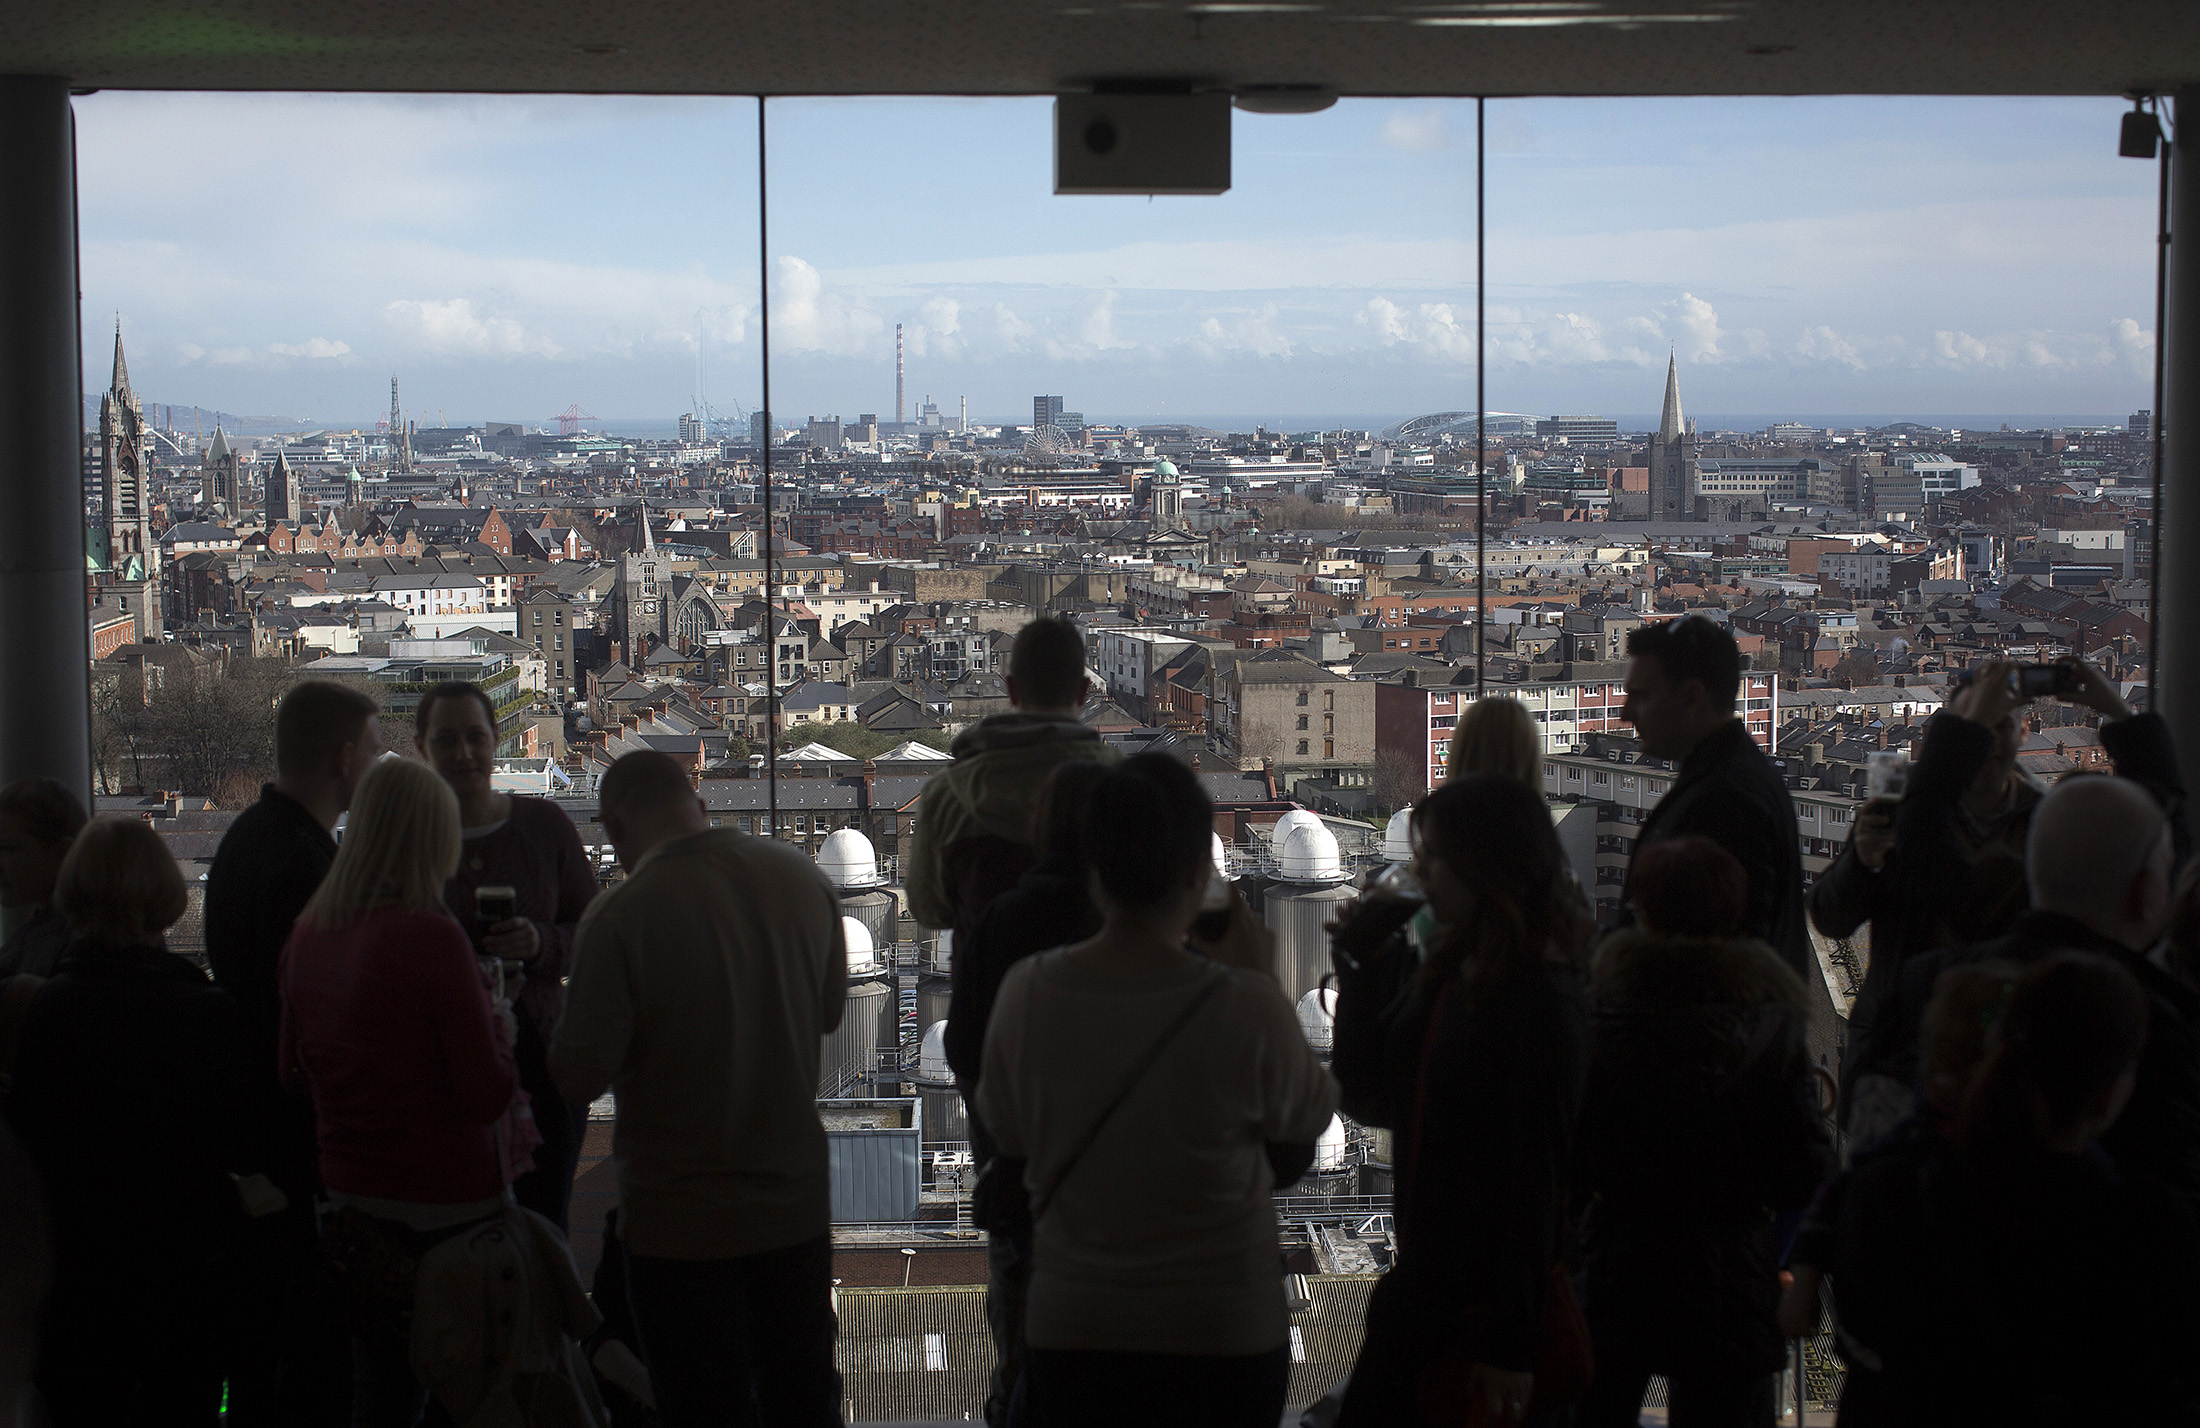 Visitors look out over the Dublin city skyline
